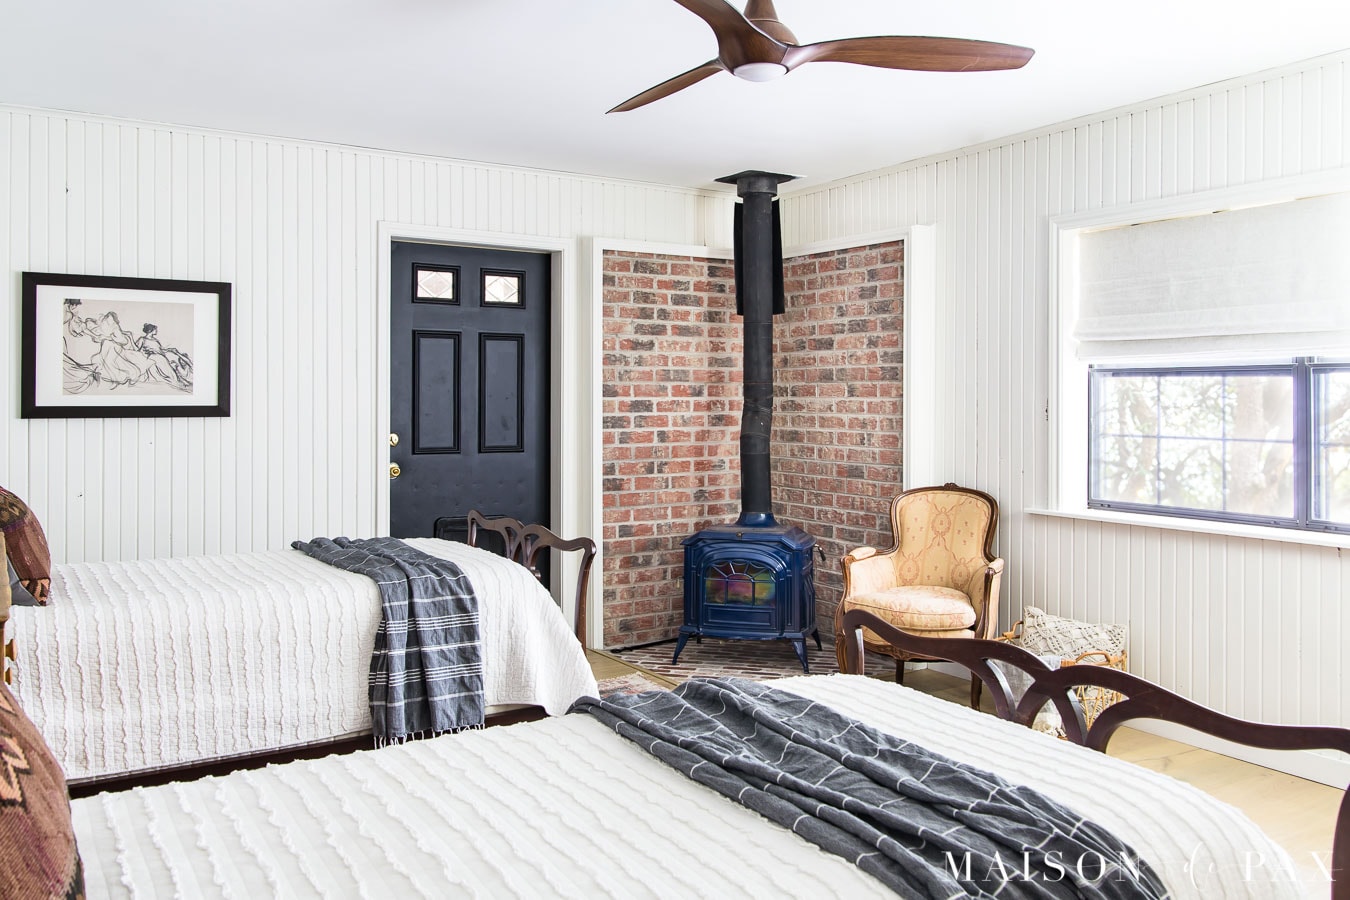 white farmhouse bedroom with planked walls, twin beds, black door, and pot belly stove | Maison de Pax